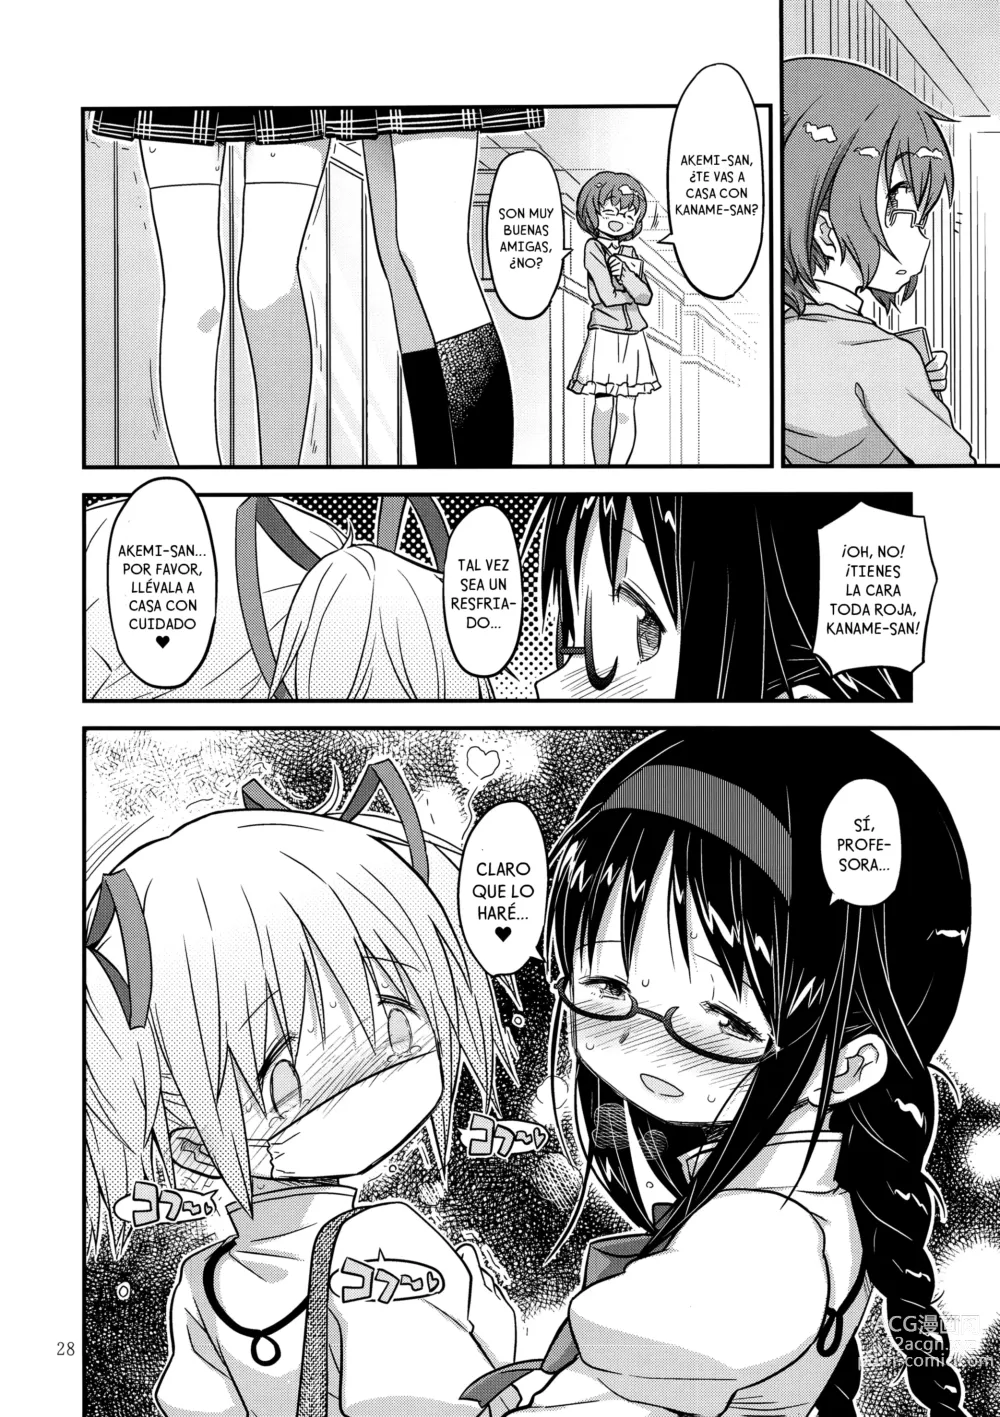 Page 27 of doujinshi Its Time to Fall?